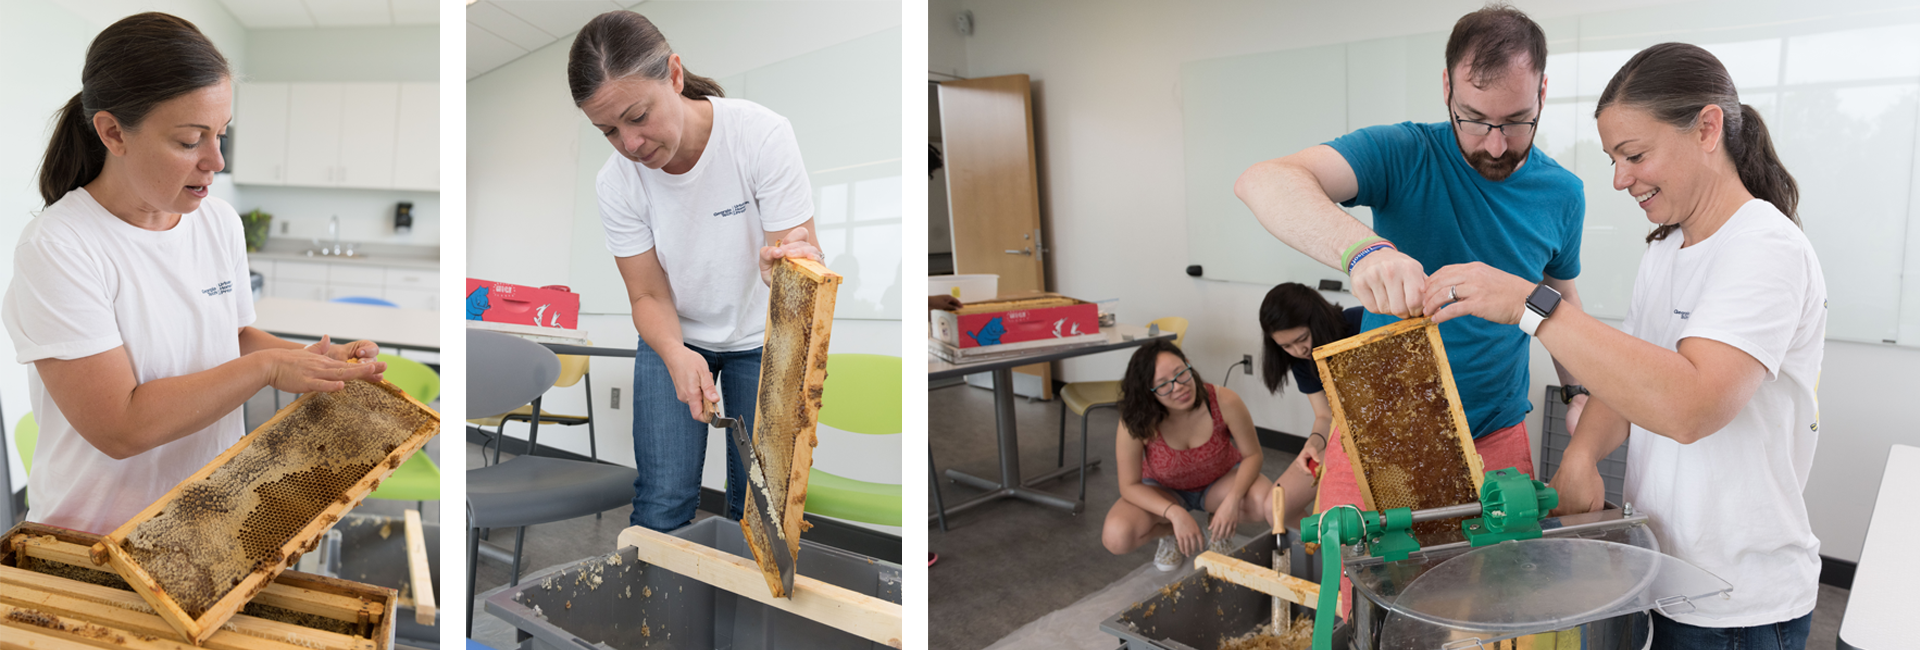 leavey works with students and honeybee project